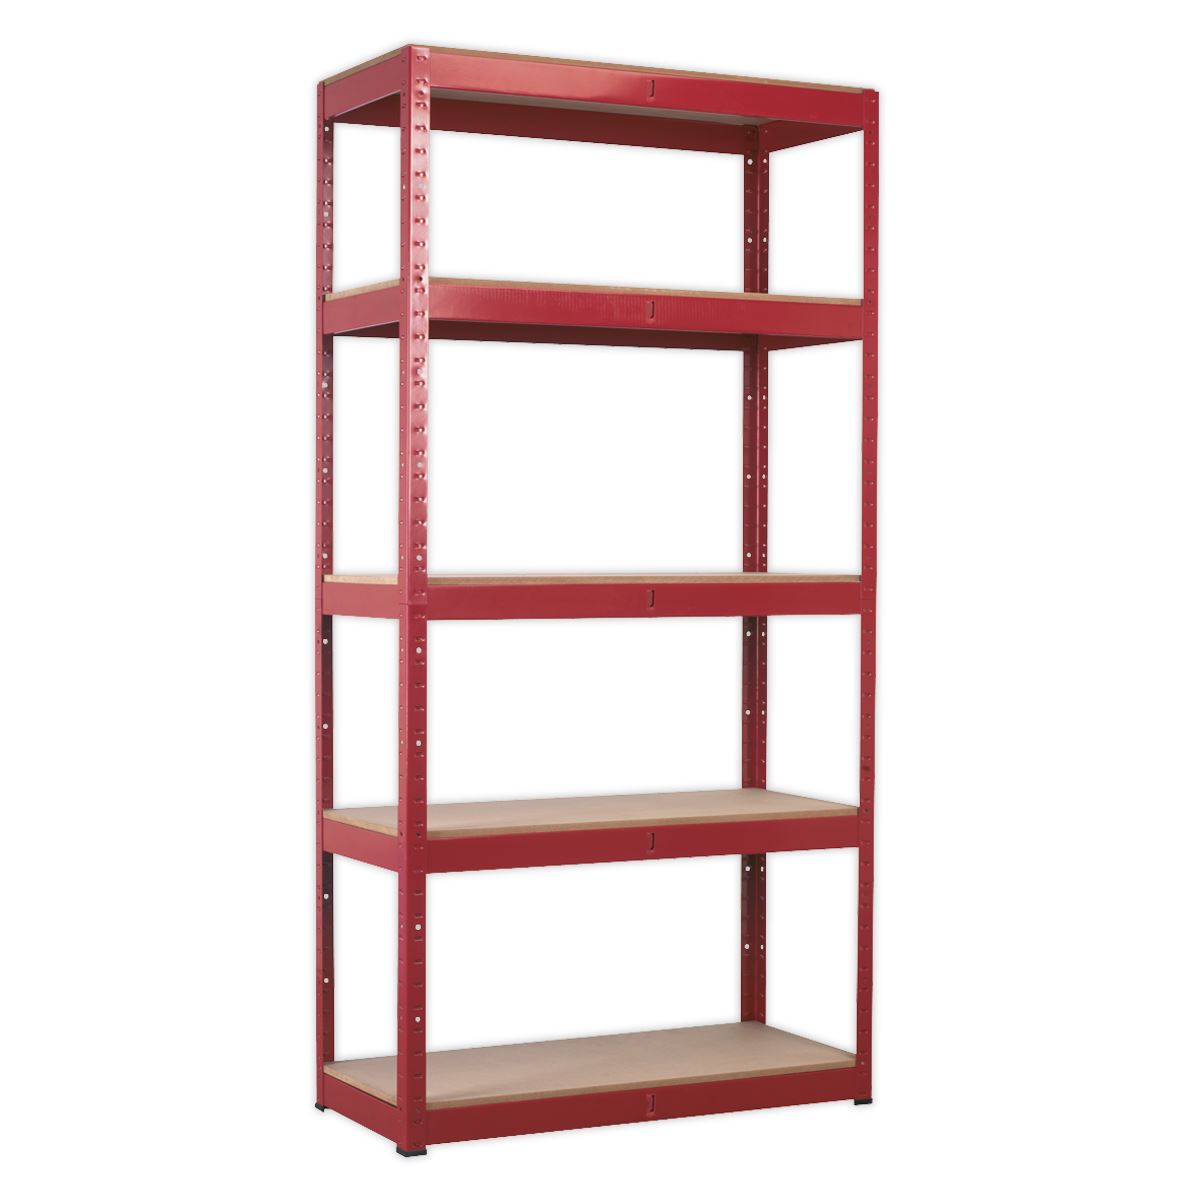 Sealey Racking Unit with 5 Shelves 350kg Capacity Per Level